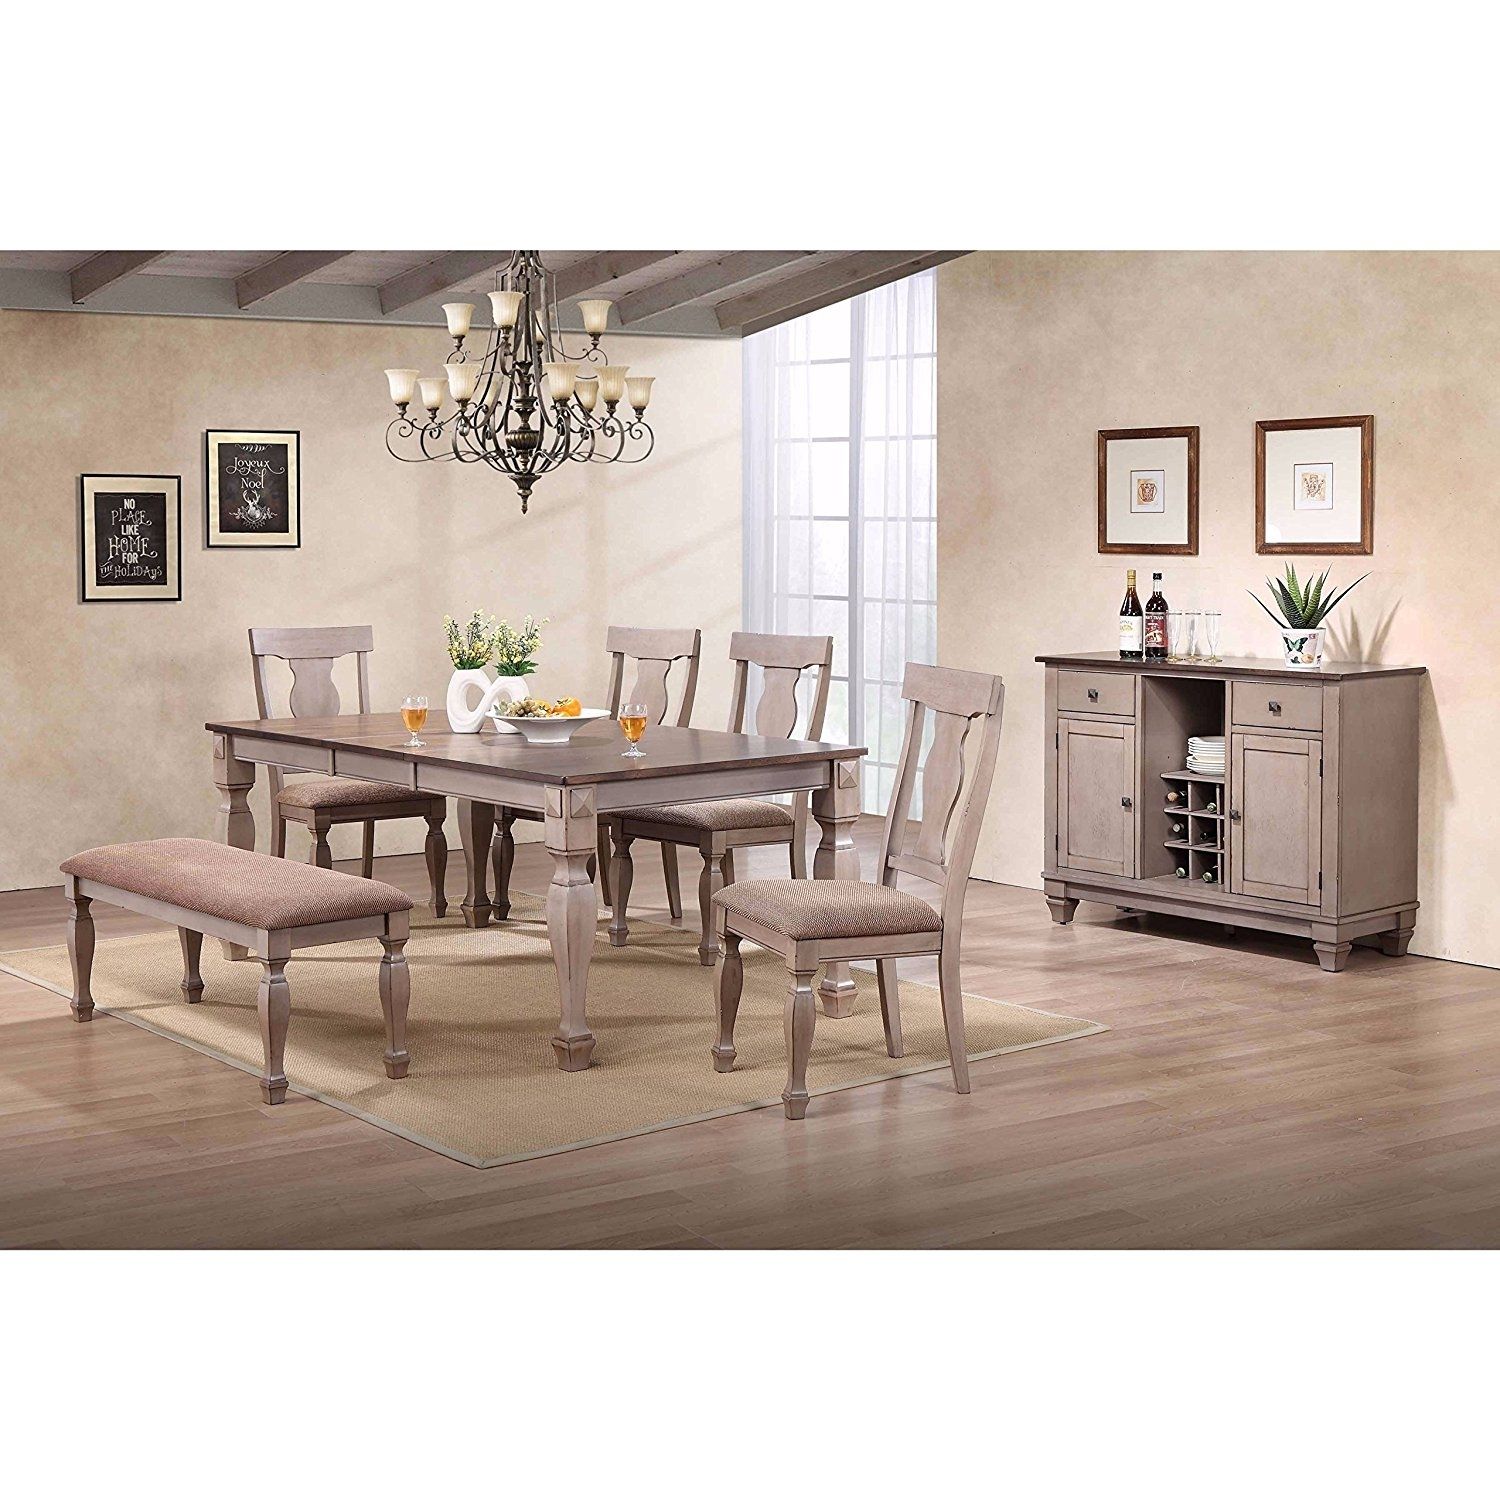 Cheap Two Tone Dining Room, Find Two Tone Dining Room Deals On Line Within Most Recent Candice Ii 7 Piece Extension Rectangular Dining Sets With Slat Back Side Chairs (View 18 of 20)